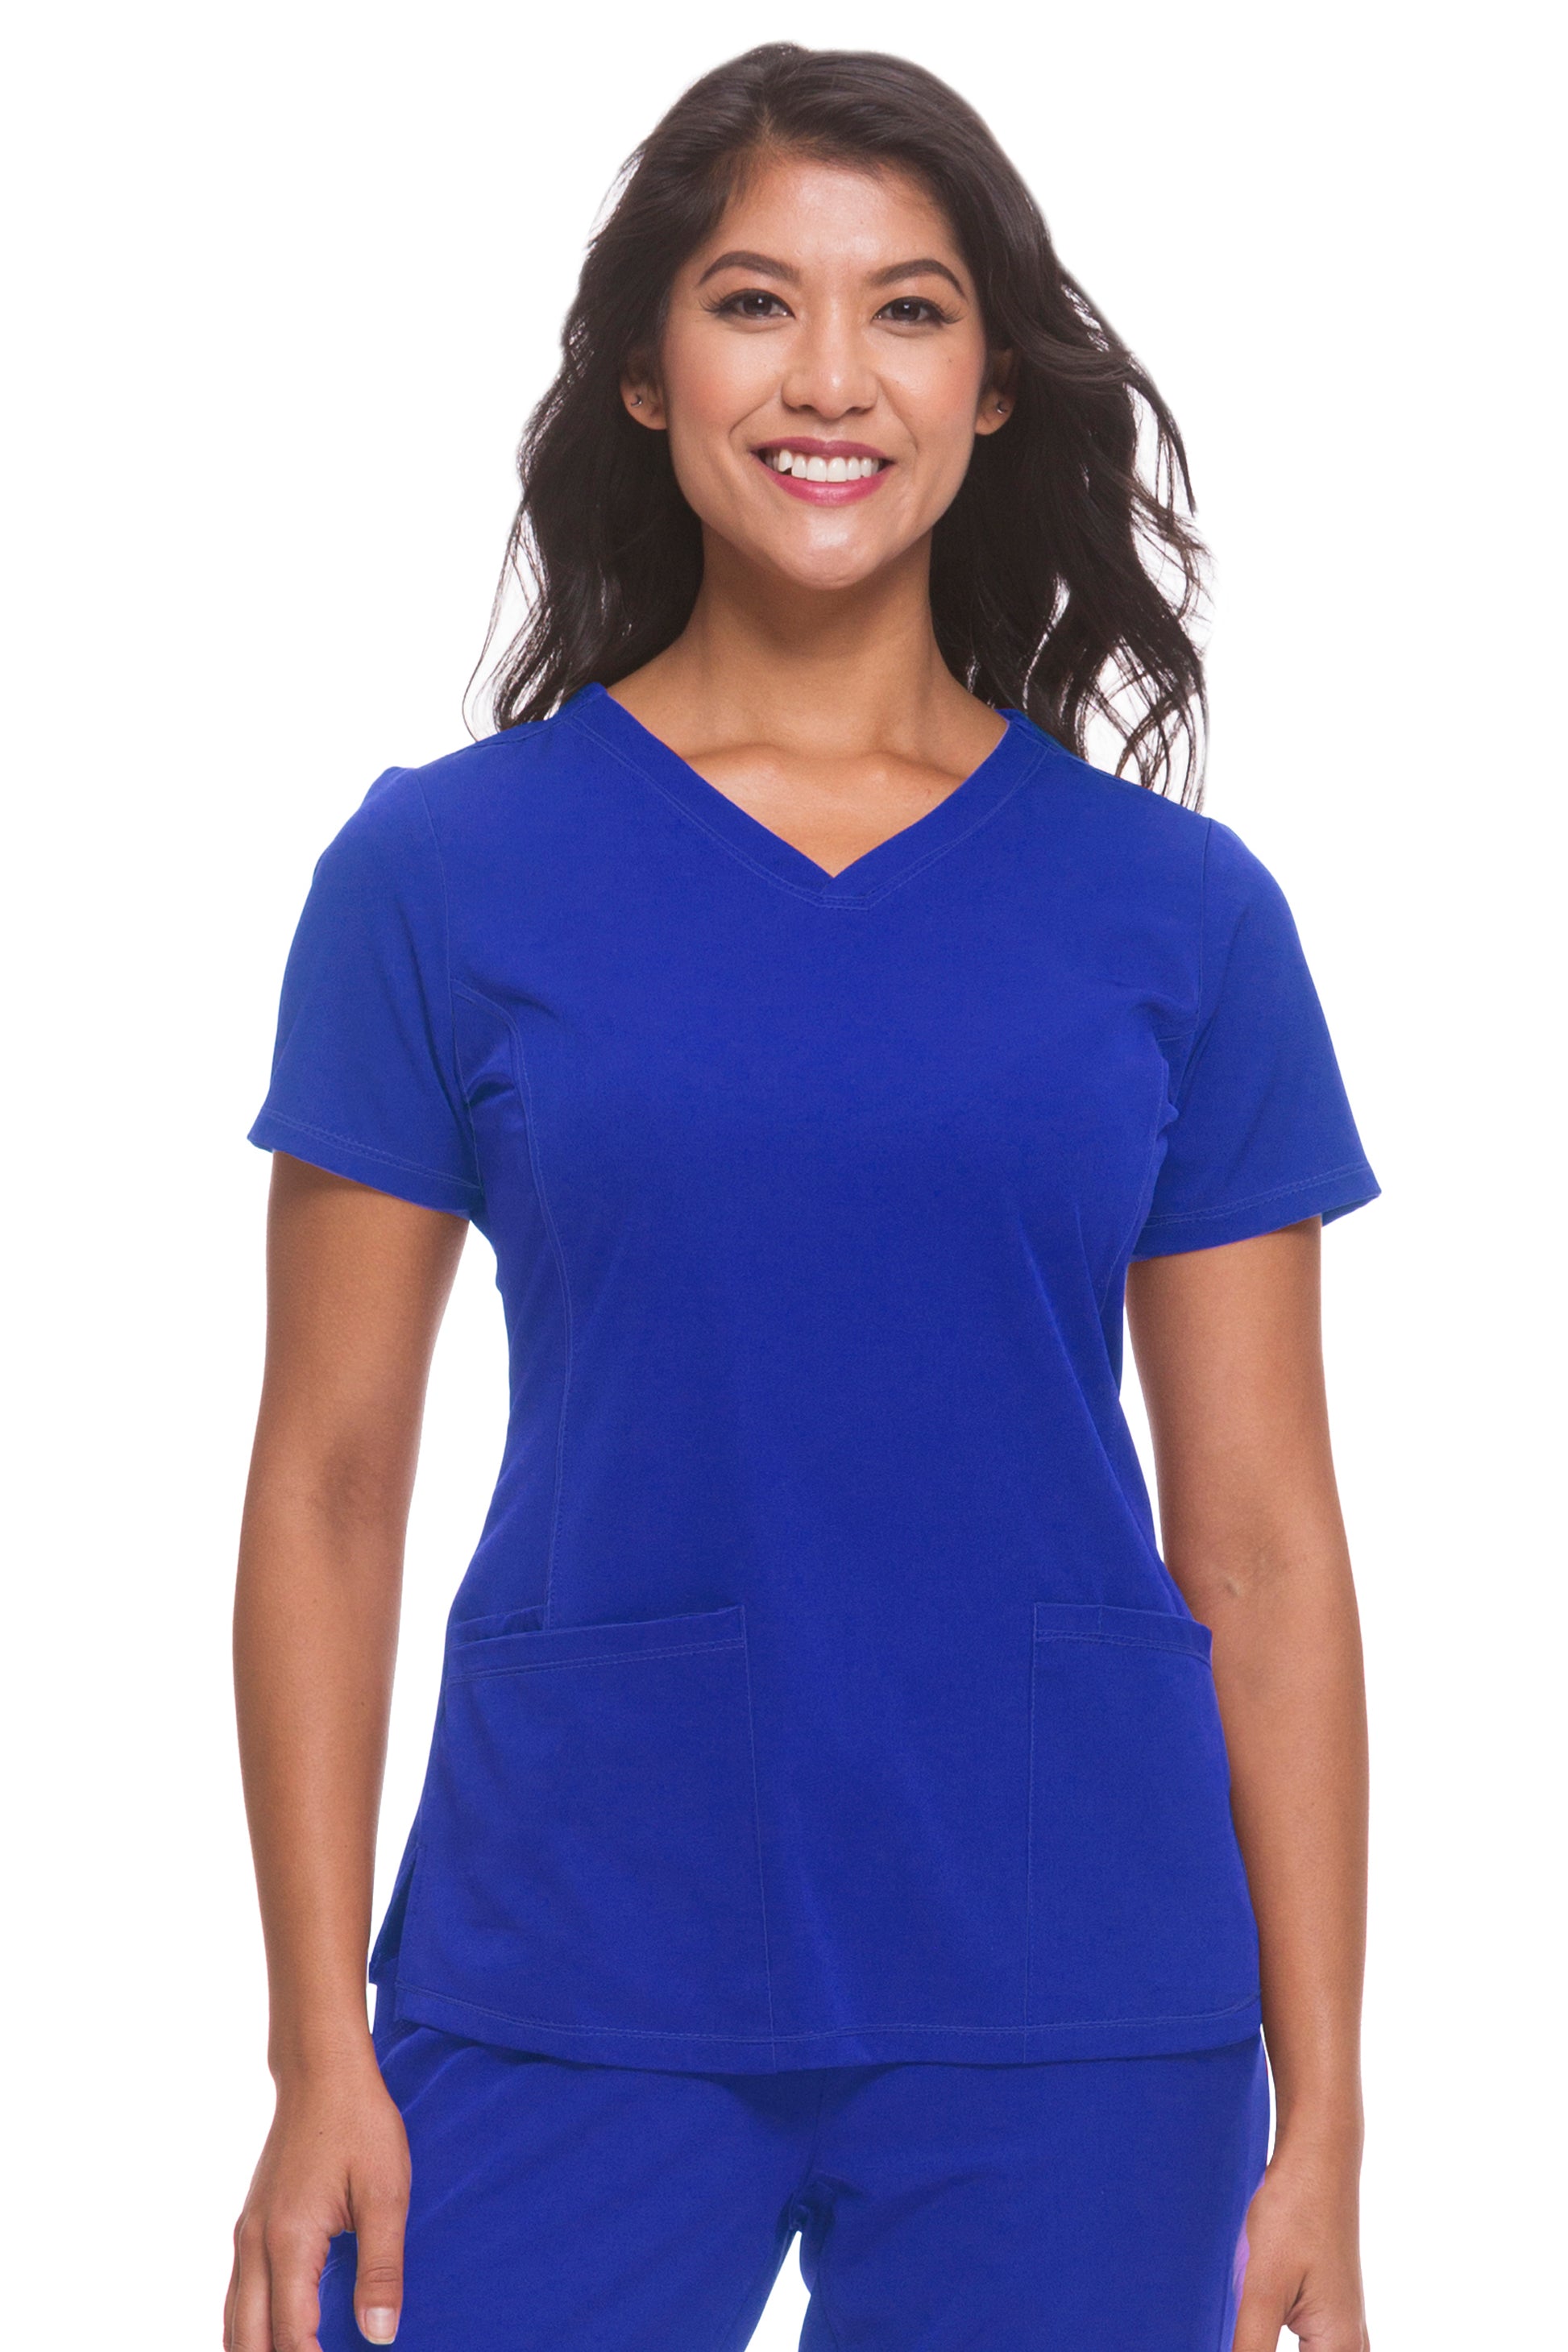 Healing Hands HH Works Monica V-Neck Scrub Top in Galaxy Blue at Parker's Clothing and Shoes